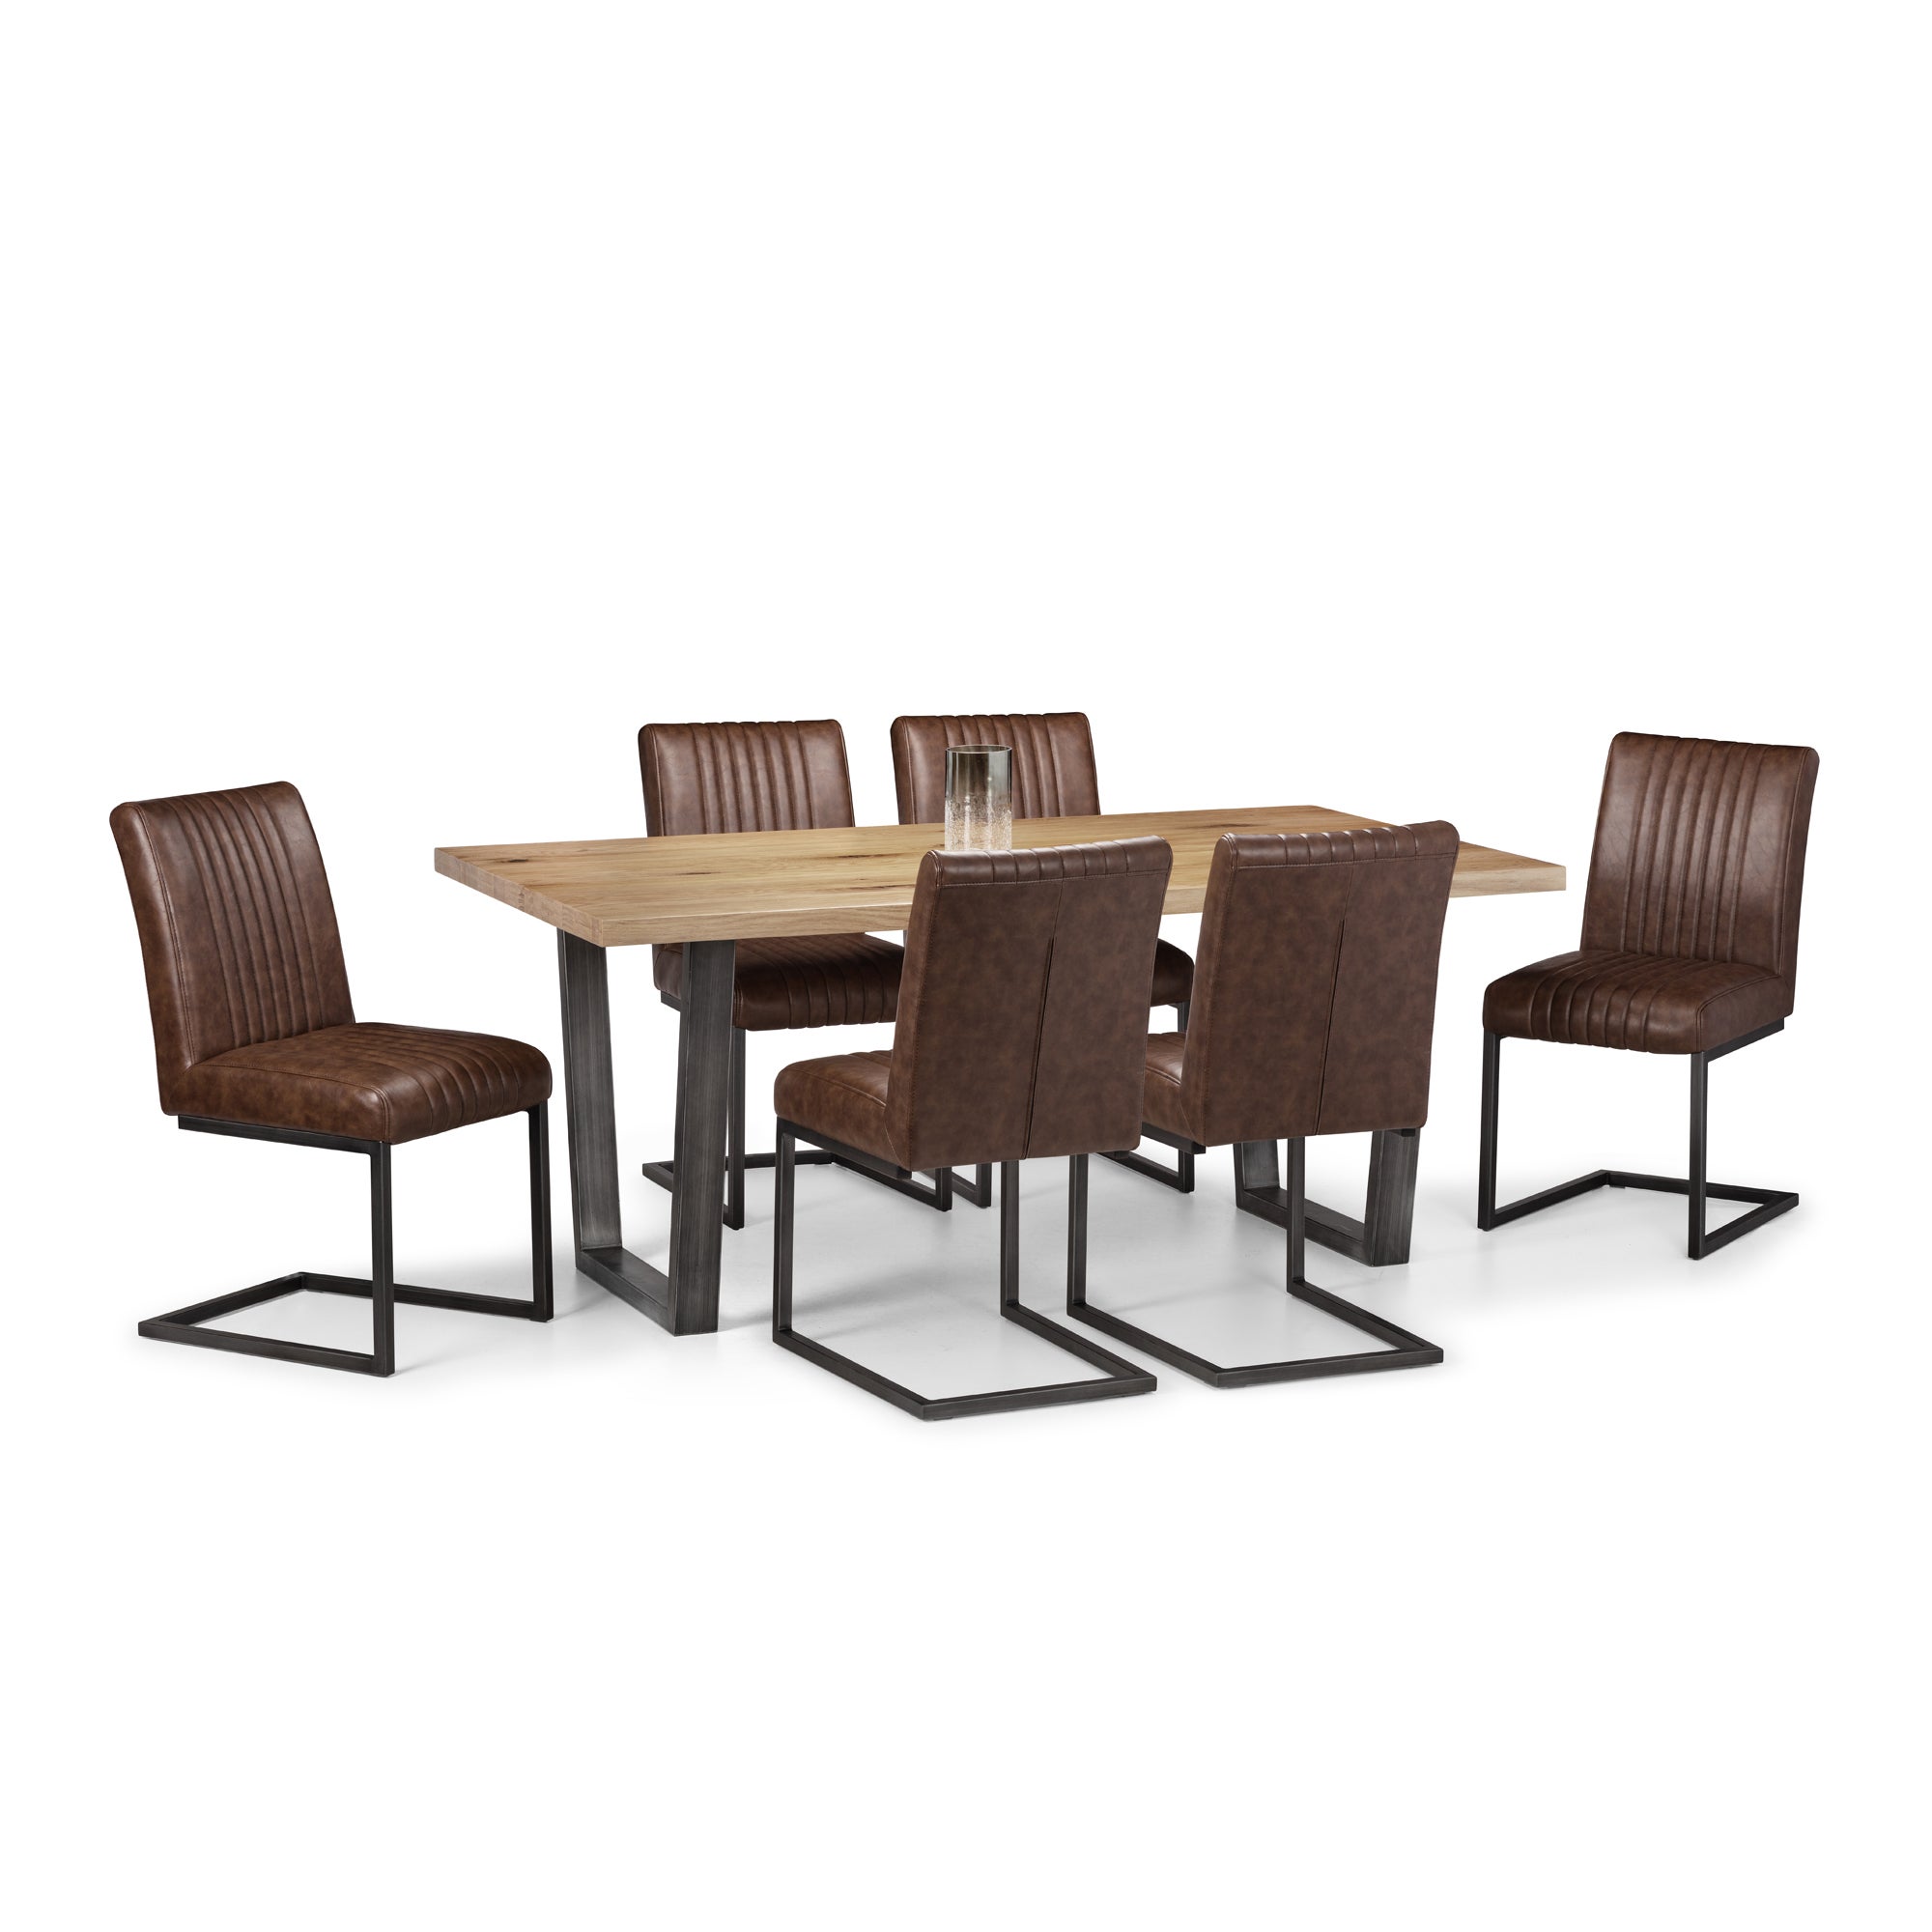 Brooklyn Rectangular Dining Table With 6 Chairs Solid Oak Brown